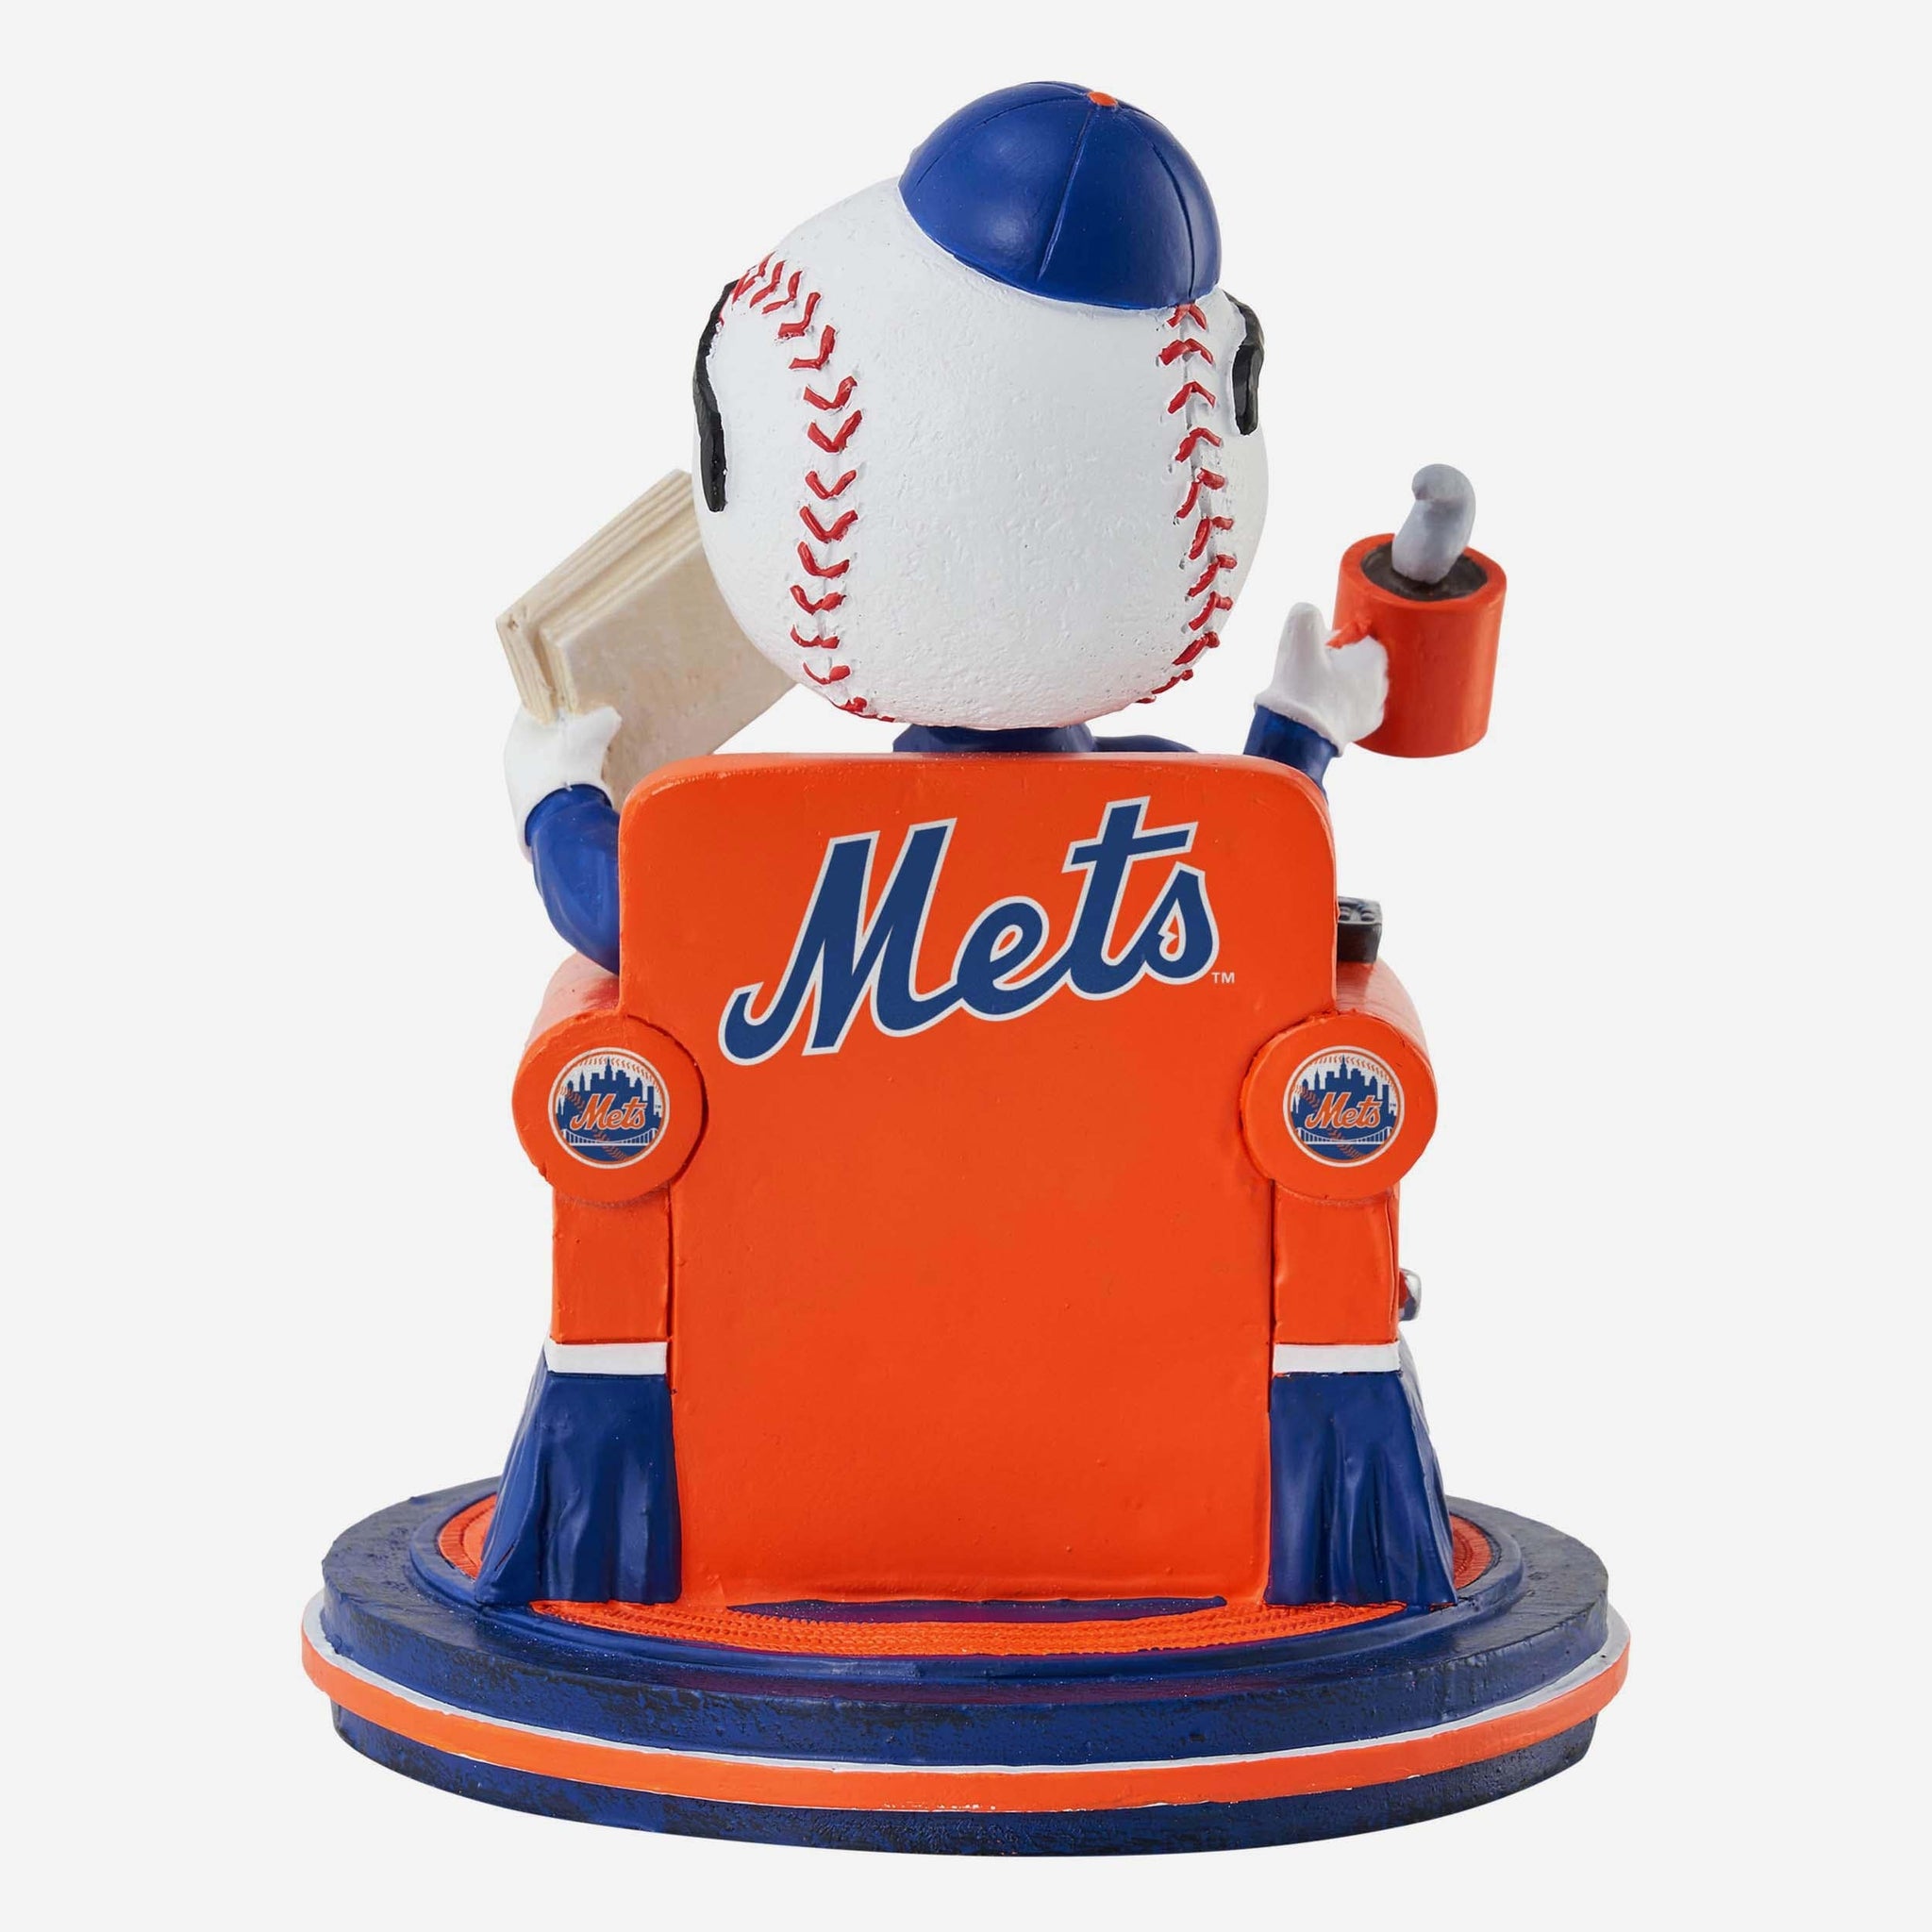 Penguin Note on X: 6. New York Mets Meet the Mets! I like the New York  buildings and use of Dodger Blue and Giant Orange, however the cartoony Mr.  Met is more